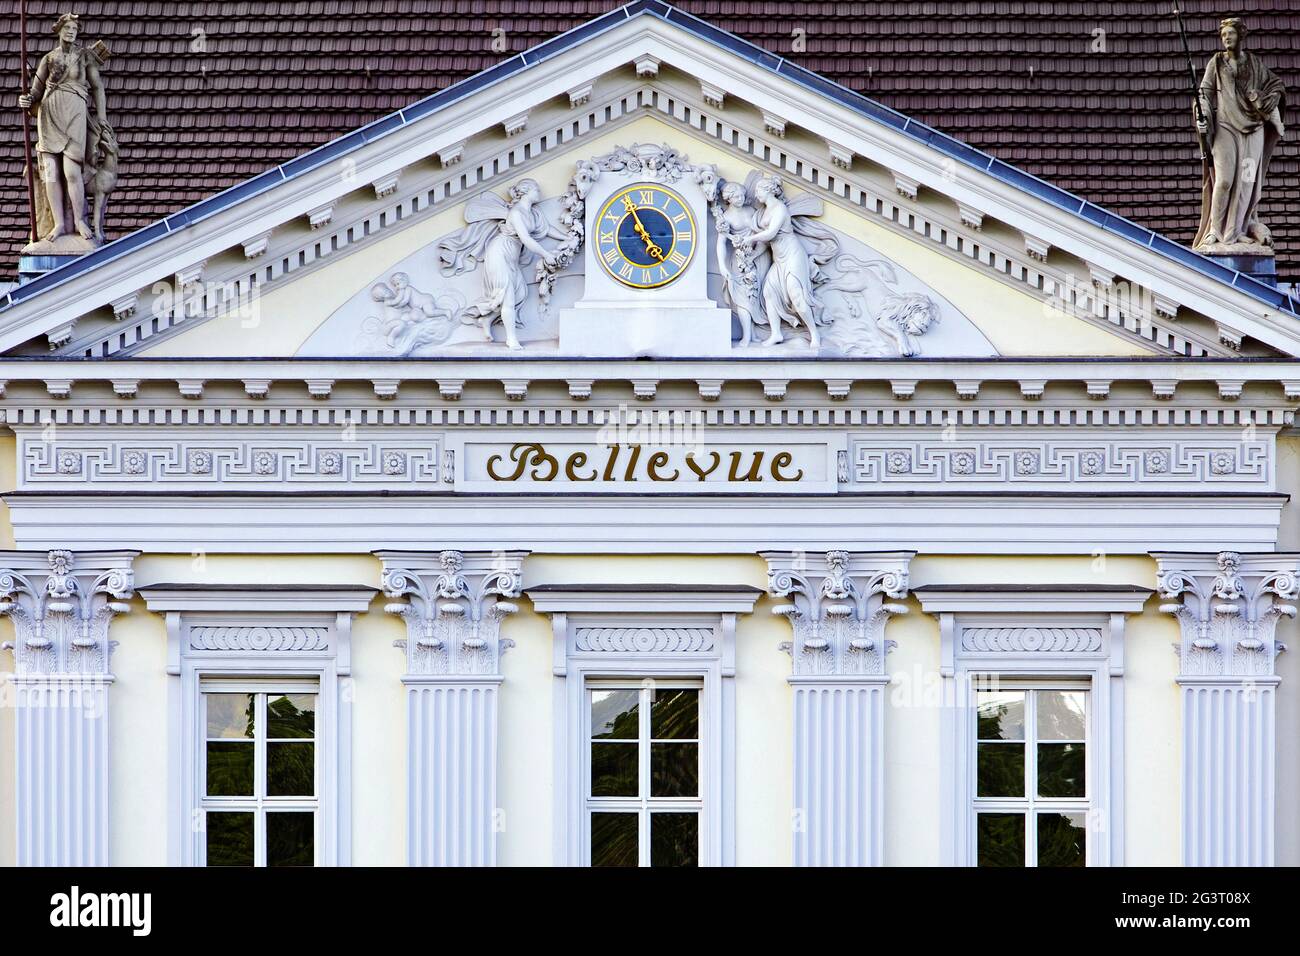 Castle Bellevue, seat of government of the President of Germany, Germany, Berlin Stock Photo